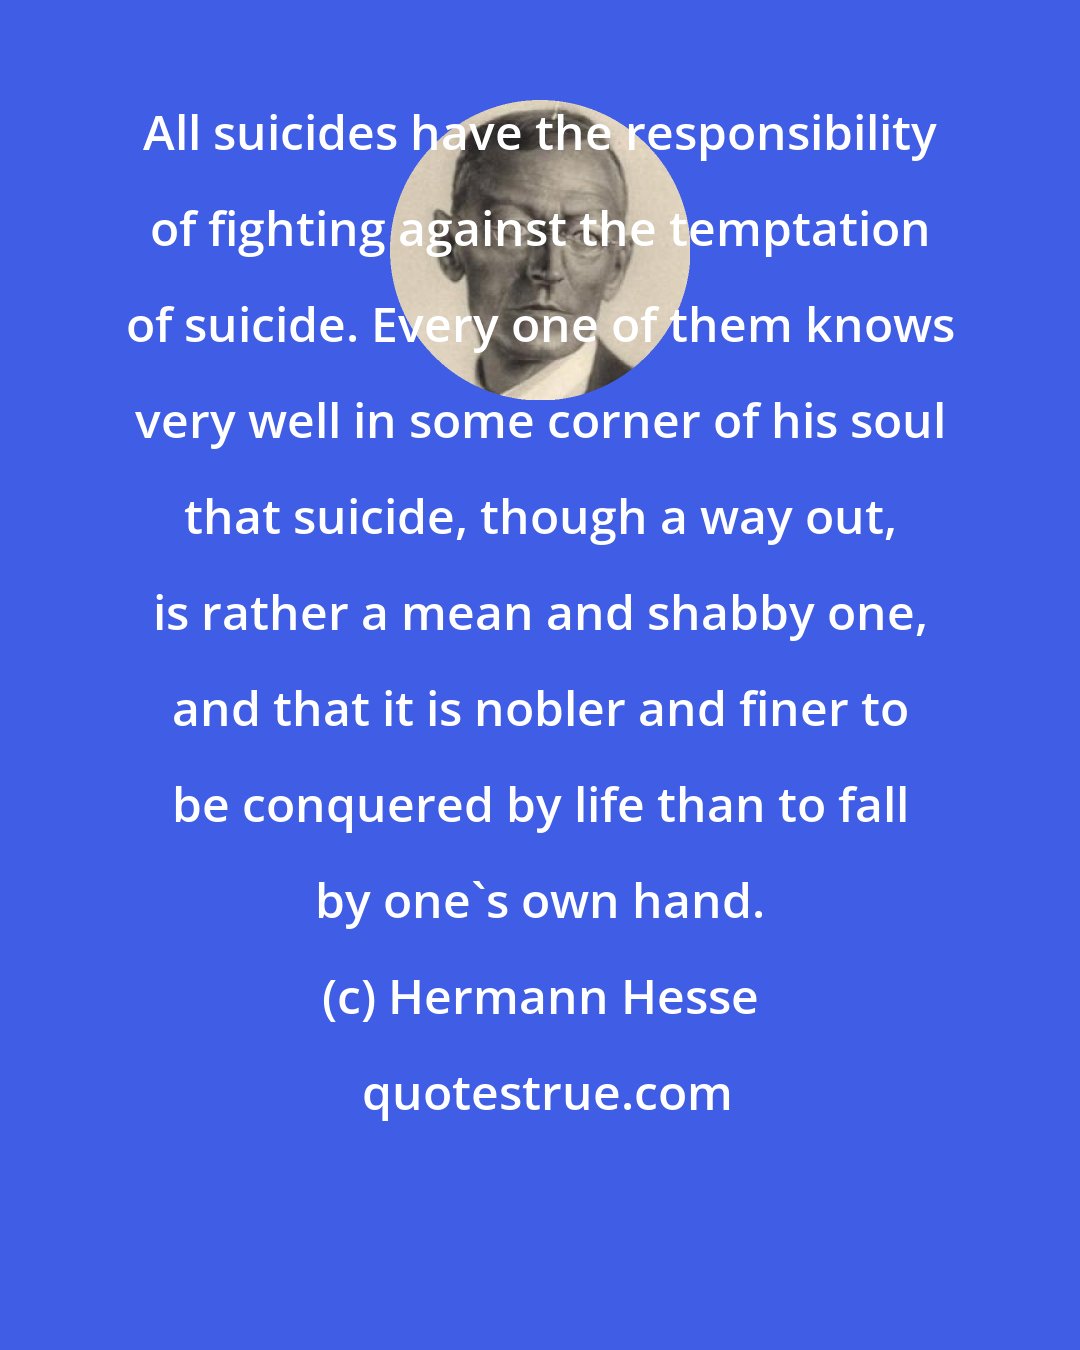 Hermann Hesse: All suicides have the responsibility of fighting against the temptation of suicide. Every one of them knows very well in some corner of his soul that suicide, though a way out, is rather a mean and shabby one, and that it is nobler and finer to be conquered by life than to fall by one's own hand.